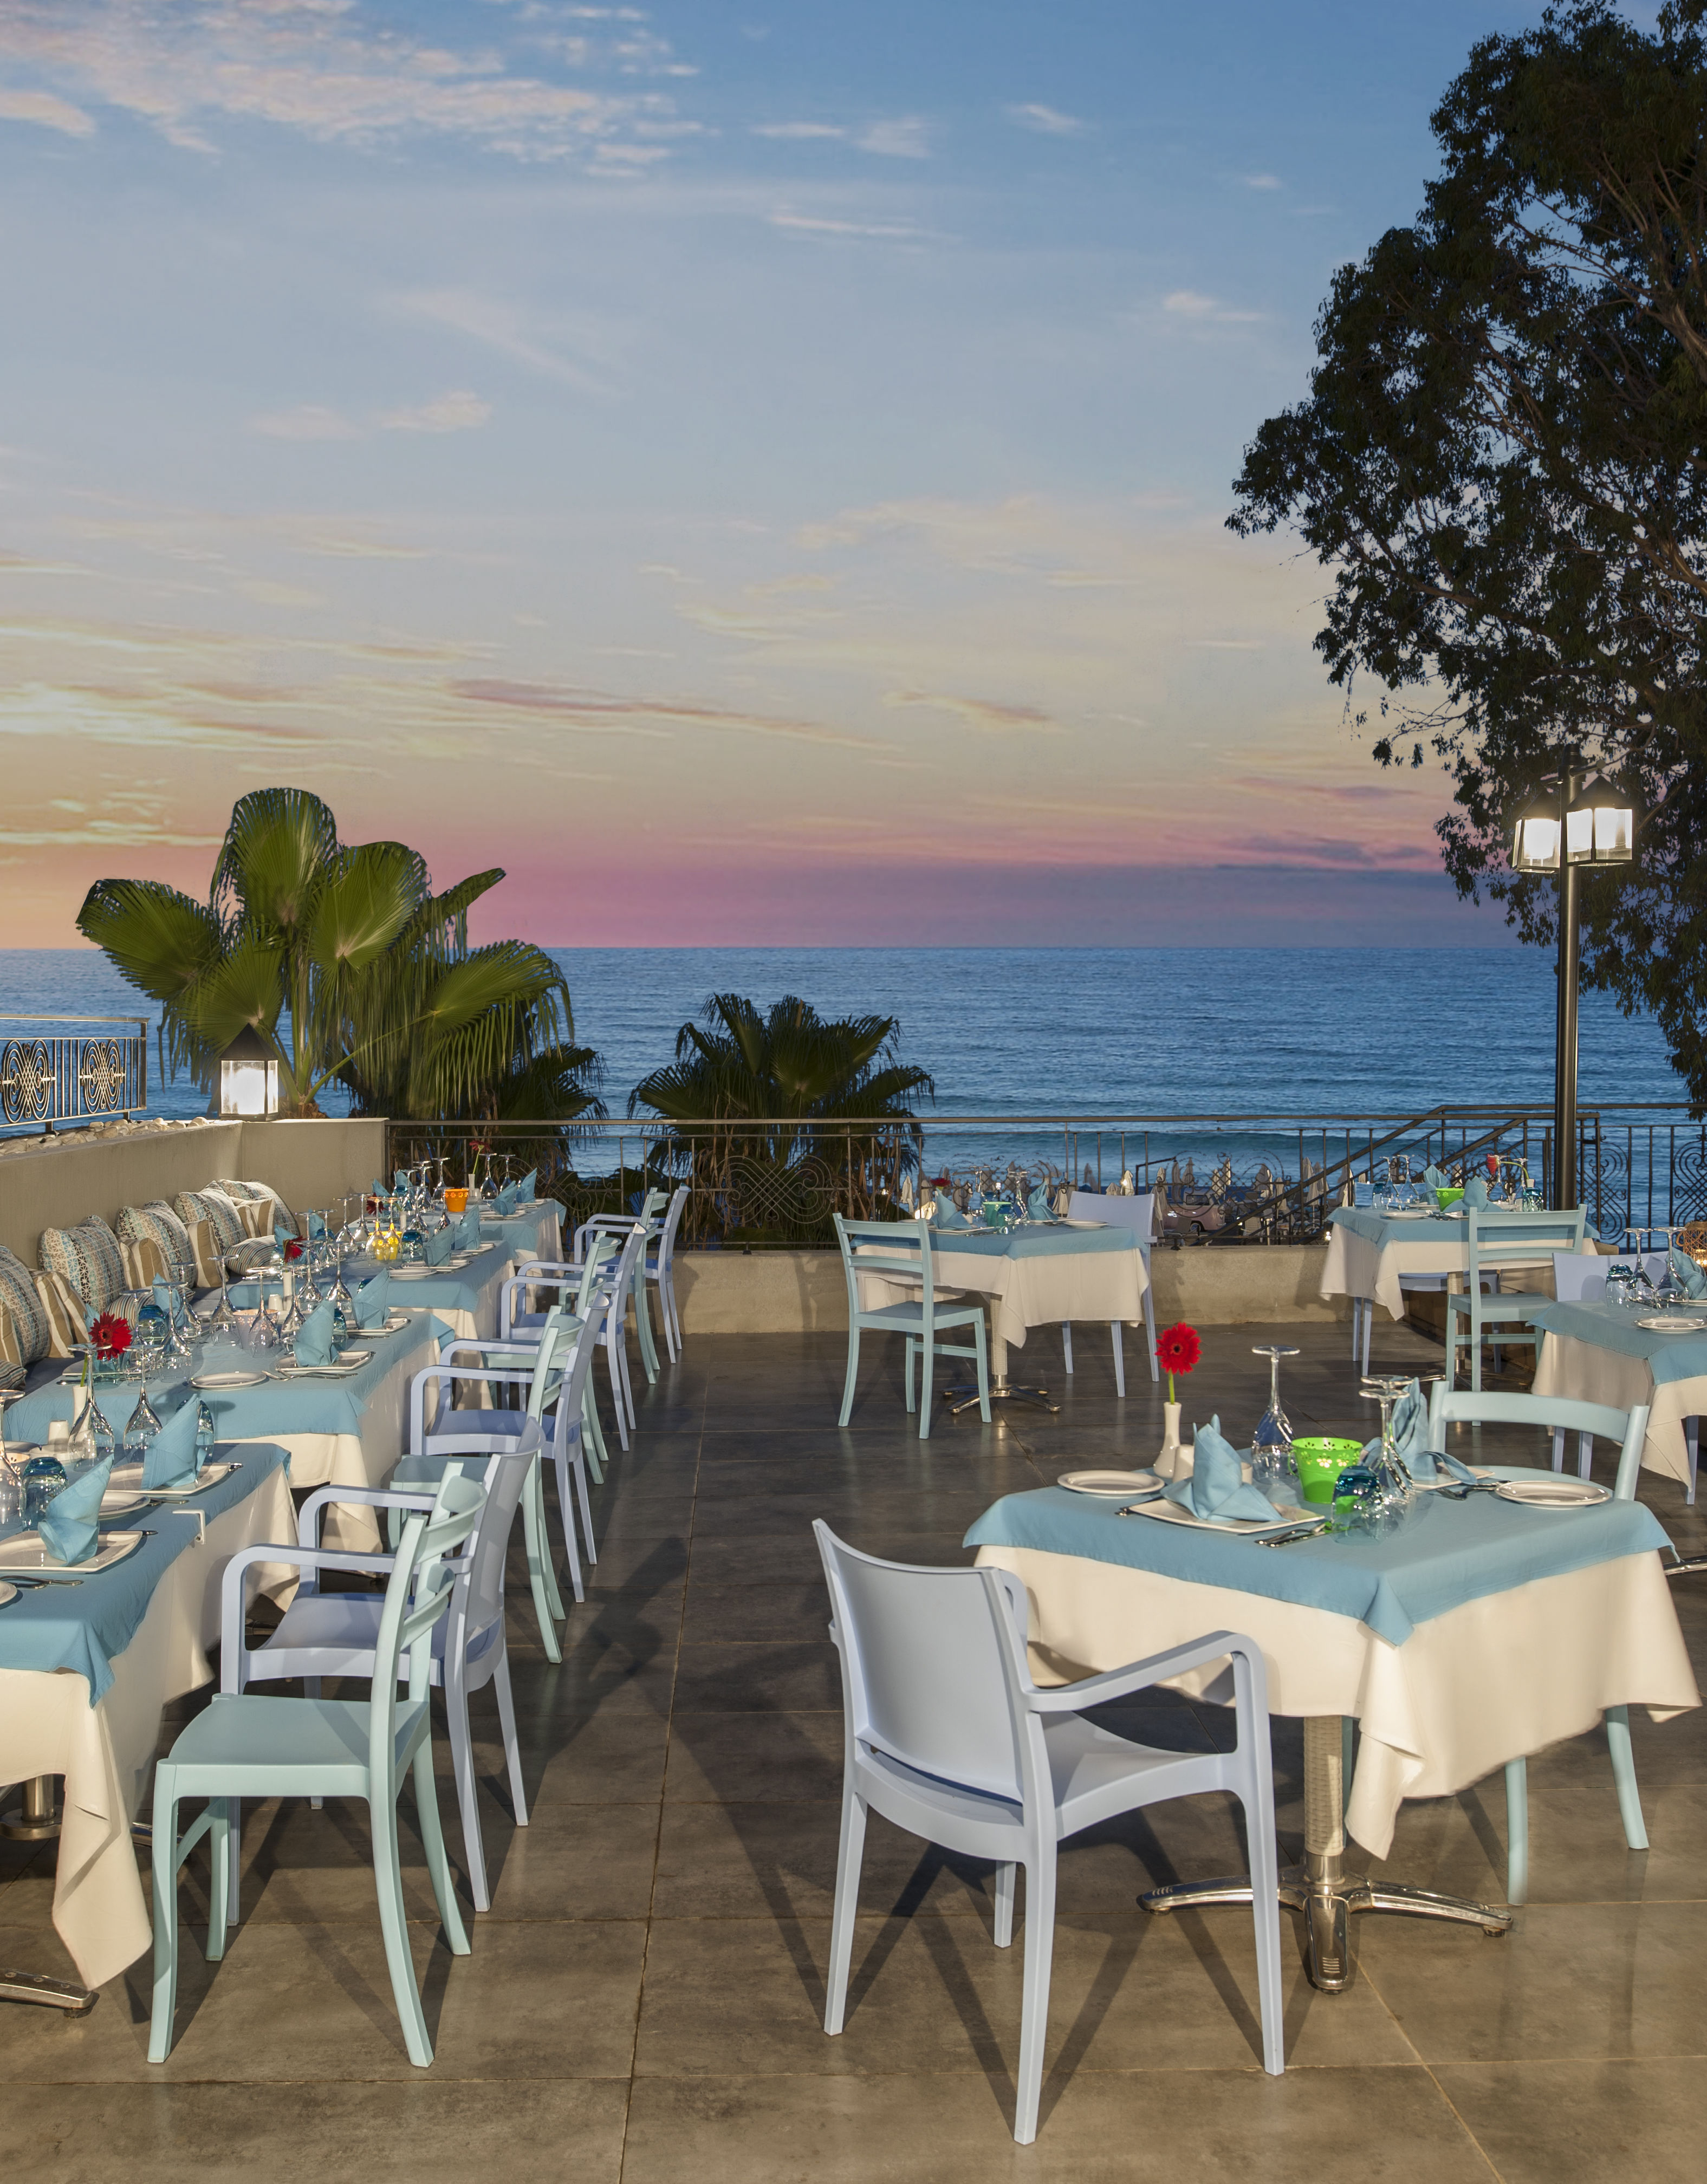 Tables in Terrace of Mediterranean Breeze Restaurant with Sea View